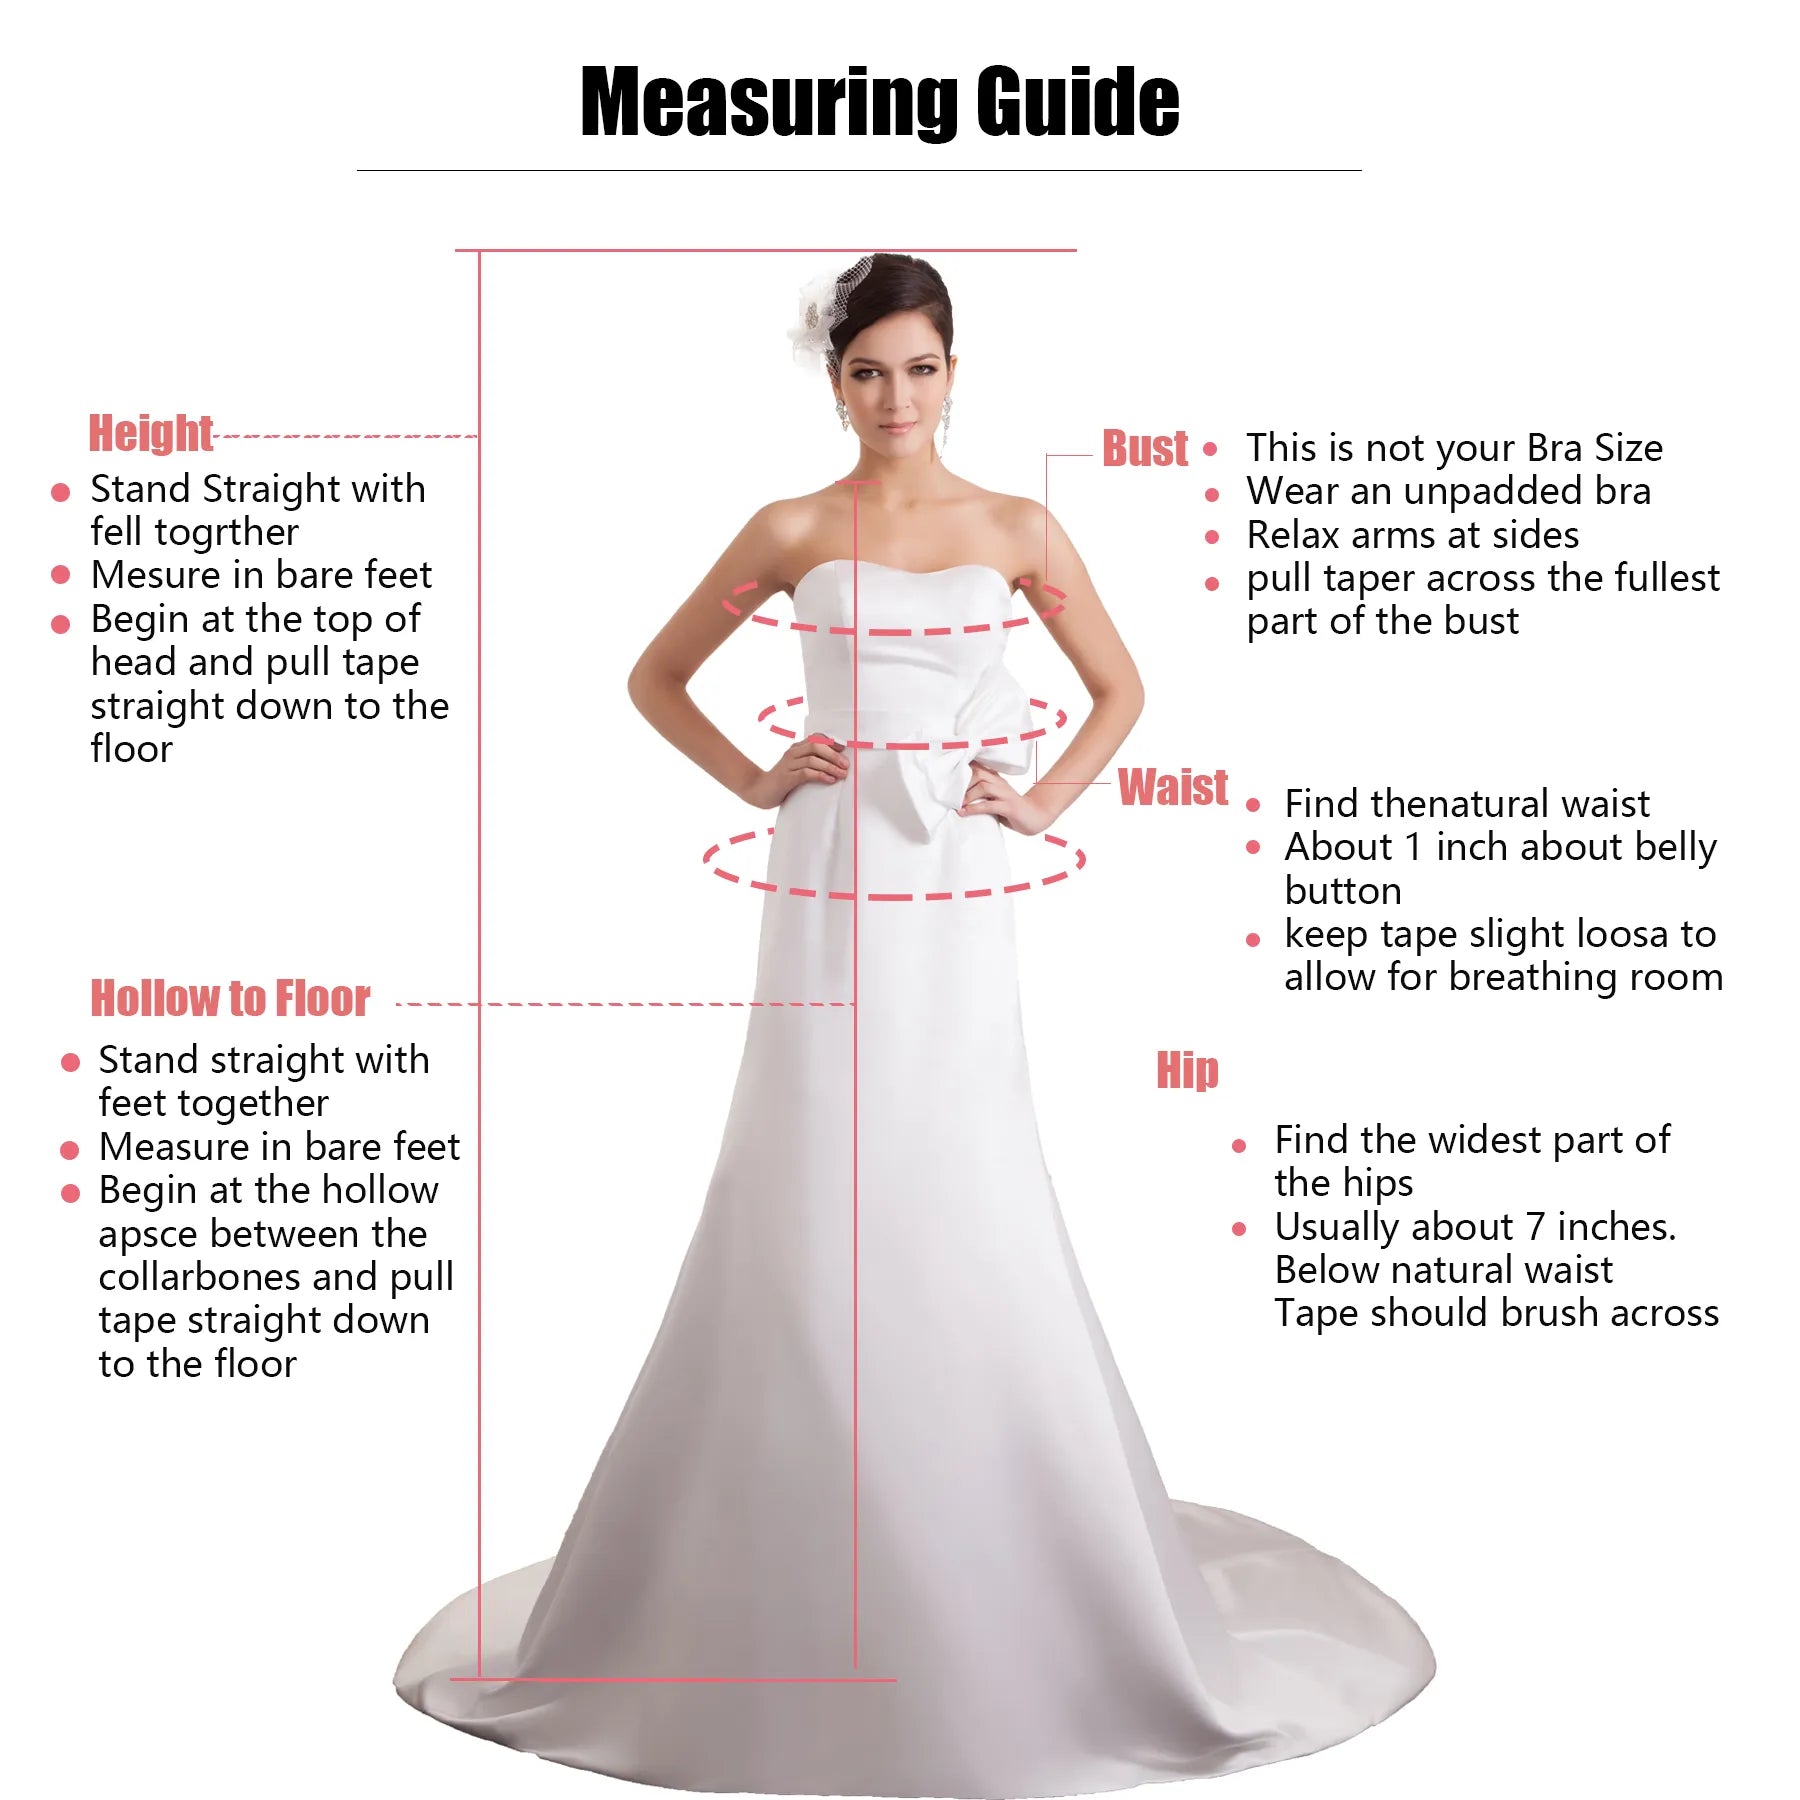 Illusion Wedding Dresses Long Puff Sleeve A Line Prom Dresses Princess V Neck Appliques Woman's Formal Bride Party Ball Gowns